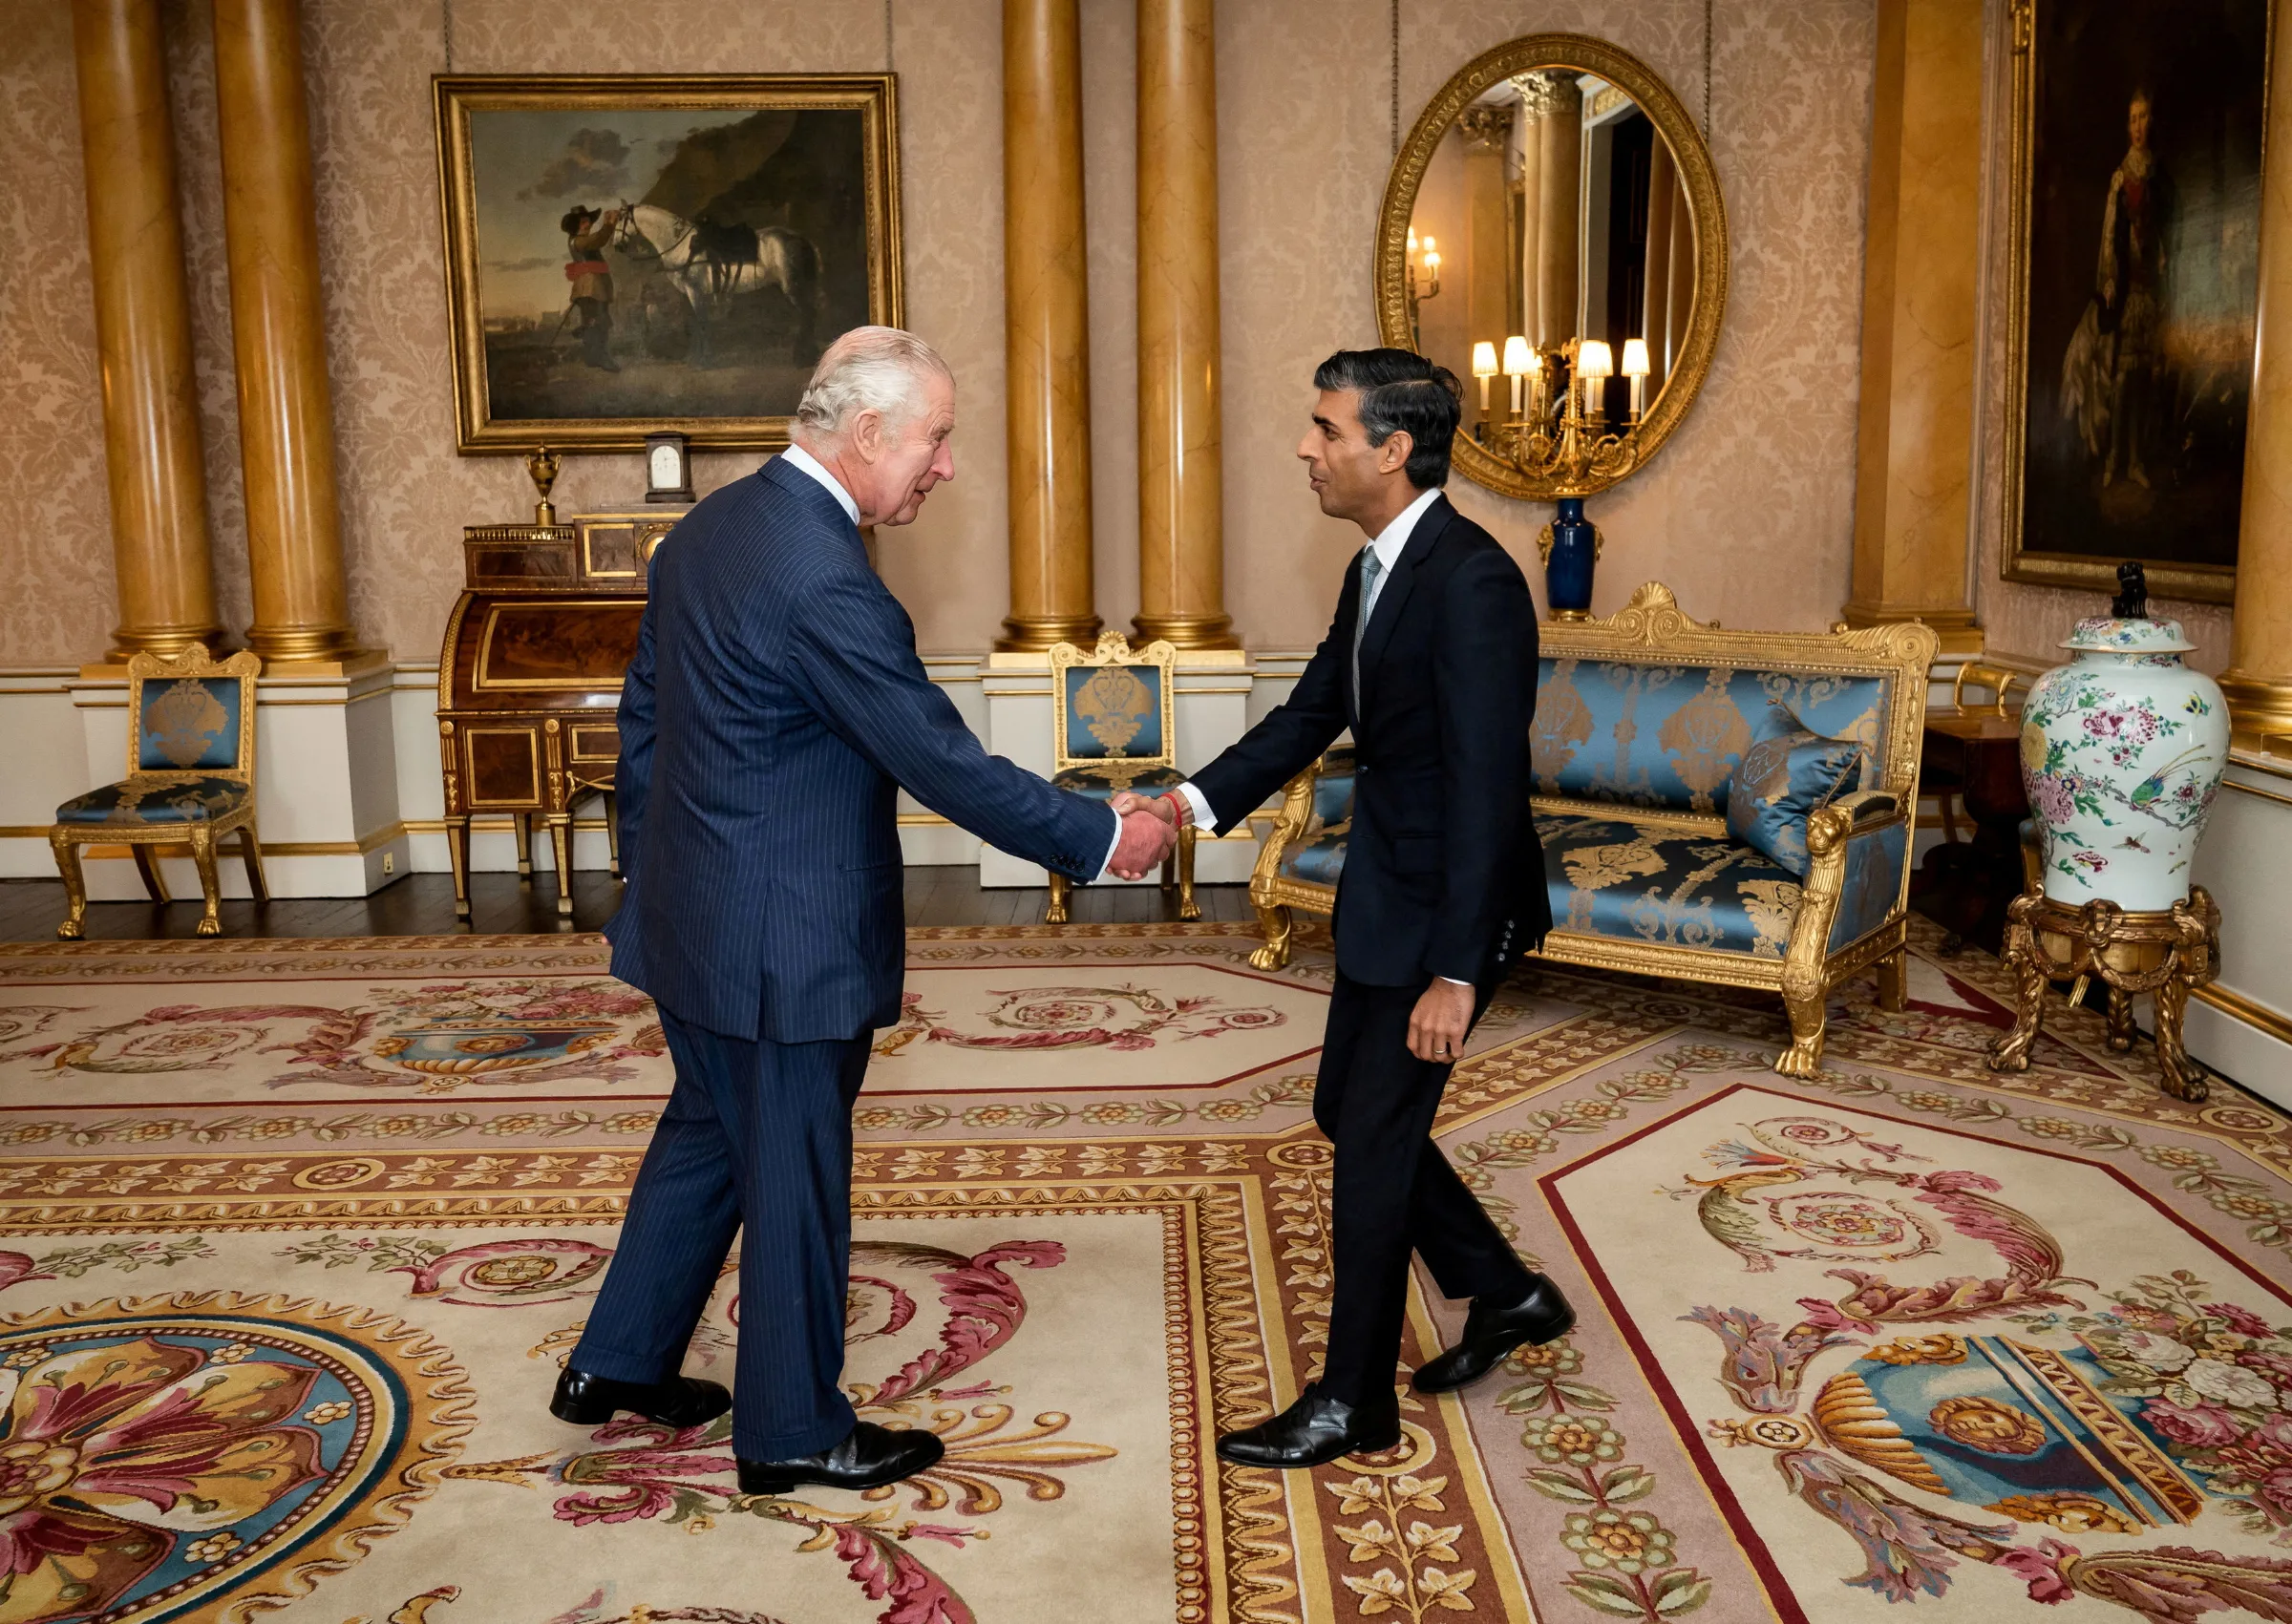 King Charles III welcomes Rishi Sunak during an audience at Buckingham Palace, London, where he invited the newly elected leader of the Conservative Party to become Prime Minister and form a new government. Tuesday October 25, 2022. Aaron Chown/PA Wire Aaron Chown/Pool via REUTERS